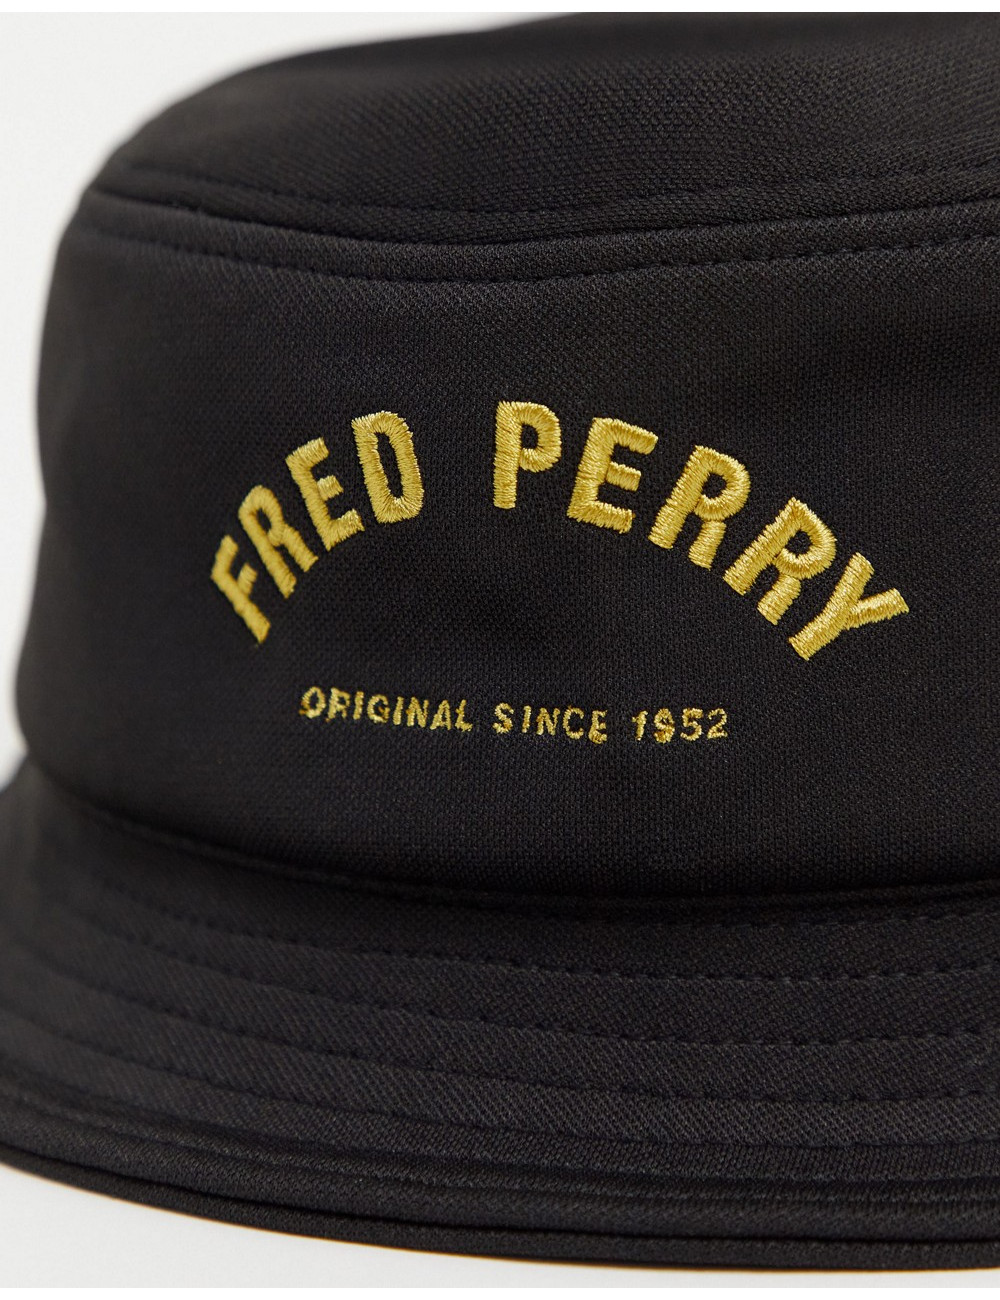 Fred Perry arch branded...